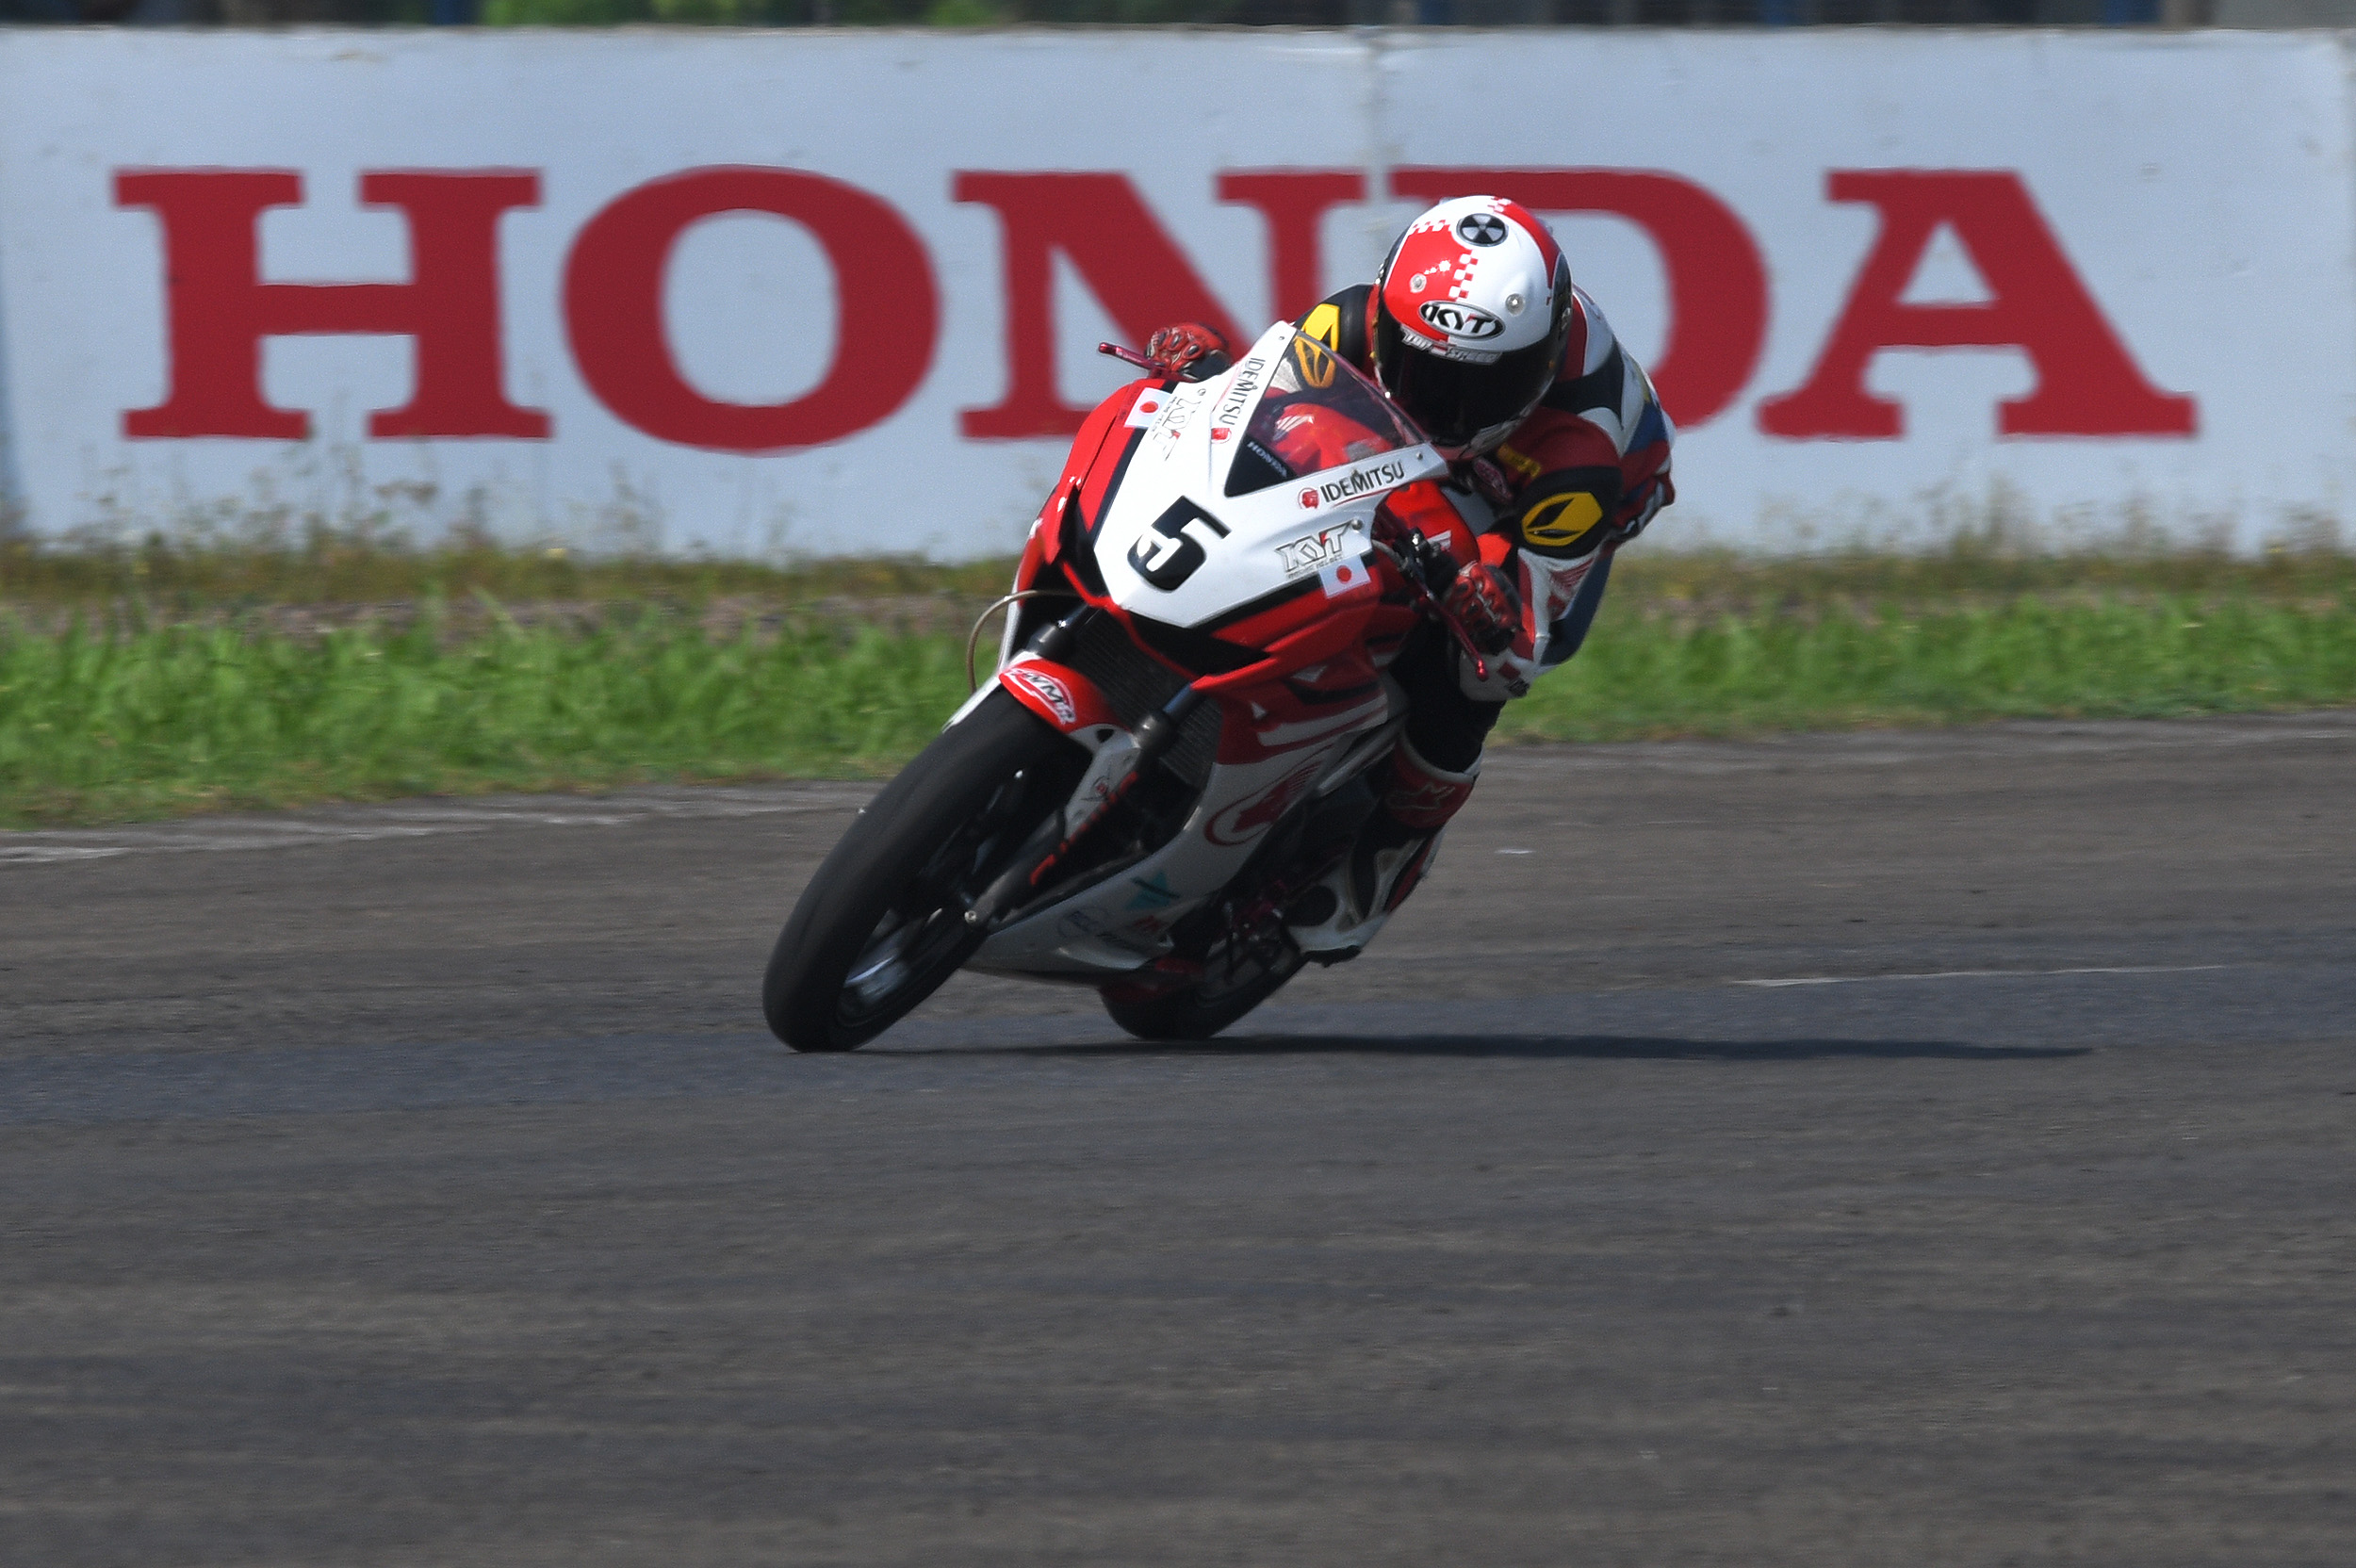 FEBRIANSYAH QUICKEST IN FIRST DAY OF PRACTICE